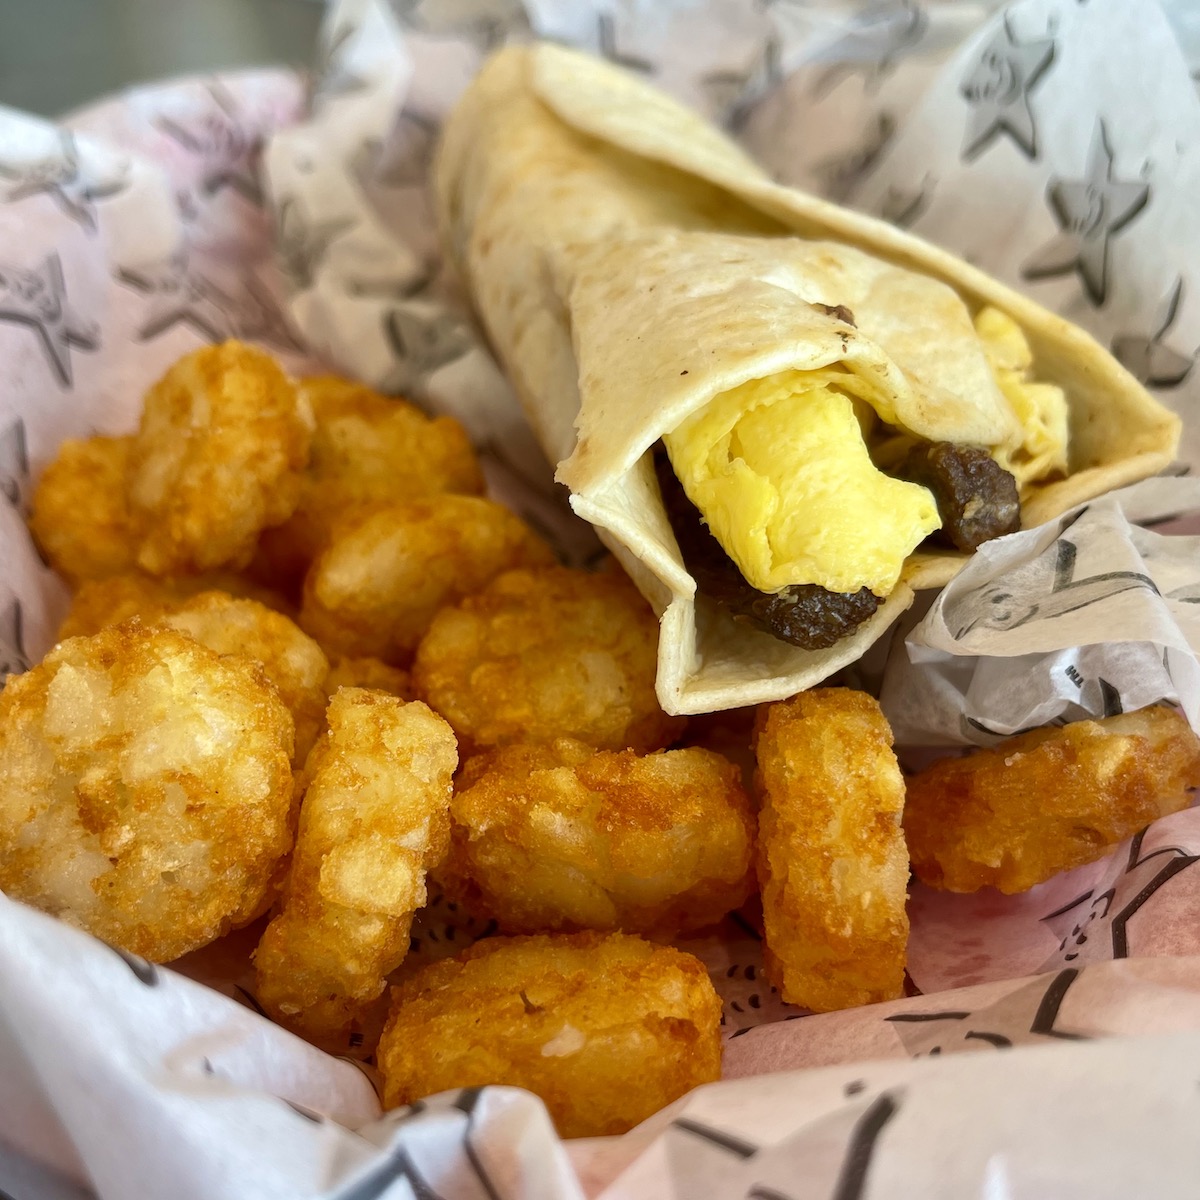 Steak Egg Burrito with Hash Rounds from Carl's Jr. in Doral, Florida